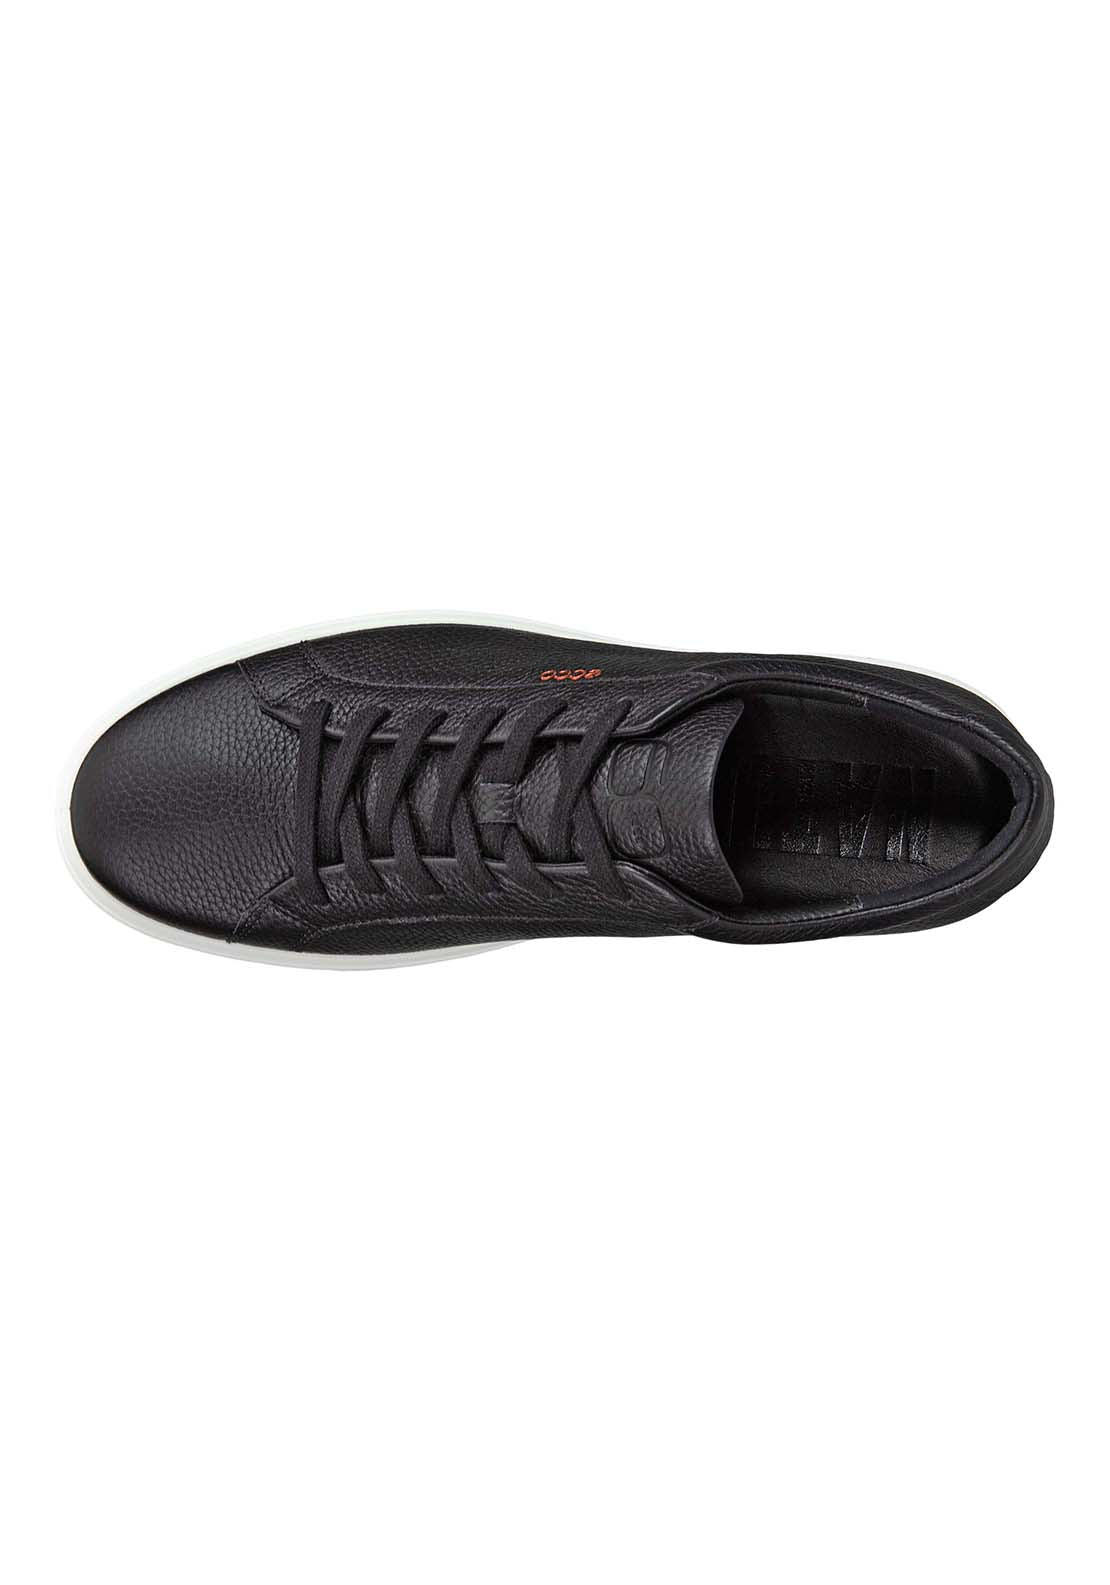 Ecco Soft 60 Casual Lace-Up 3 Shaws Department Stores